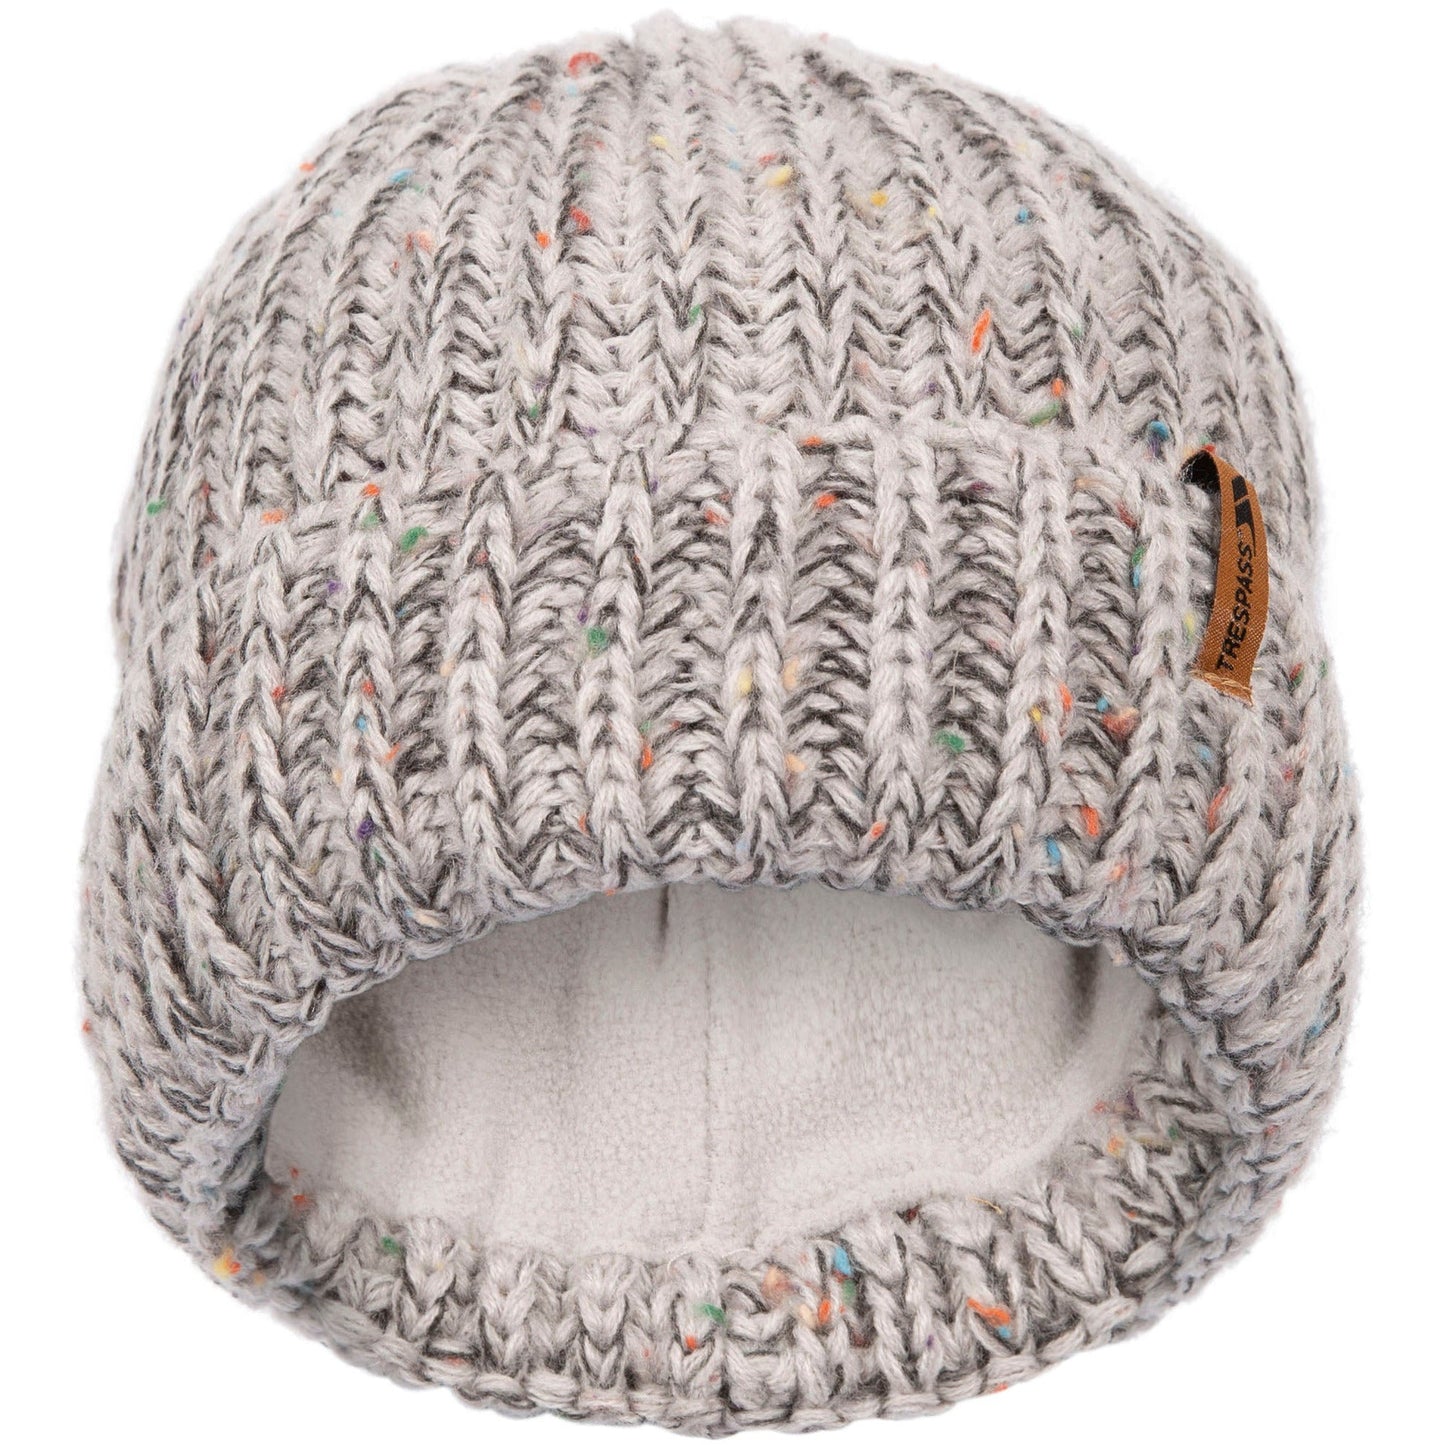 Trespass Adults Knitted and Lined Beanie Drifter in Pale Grey